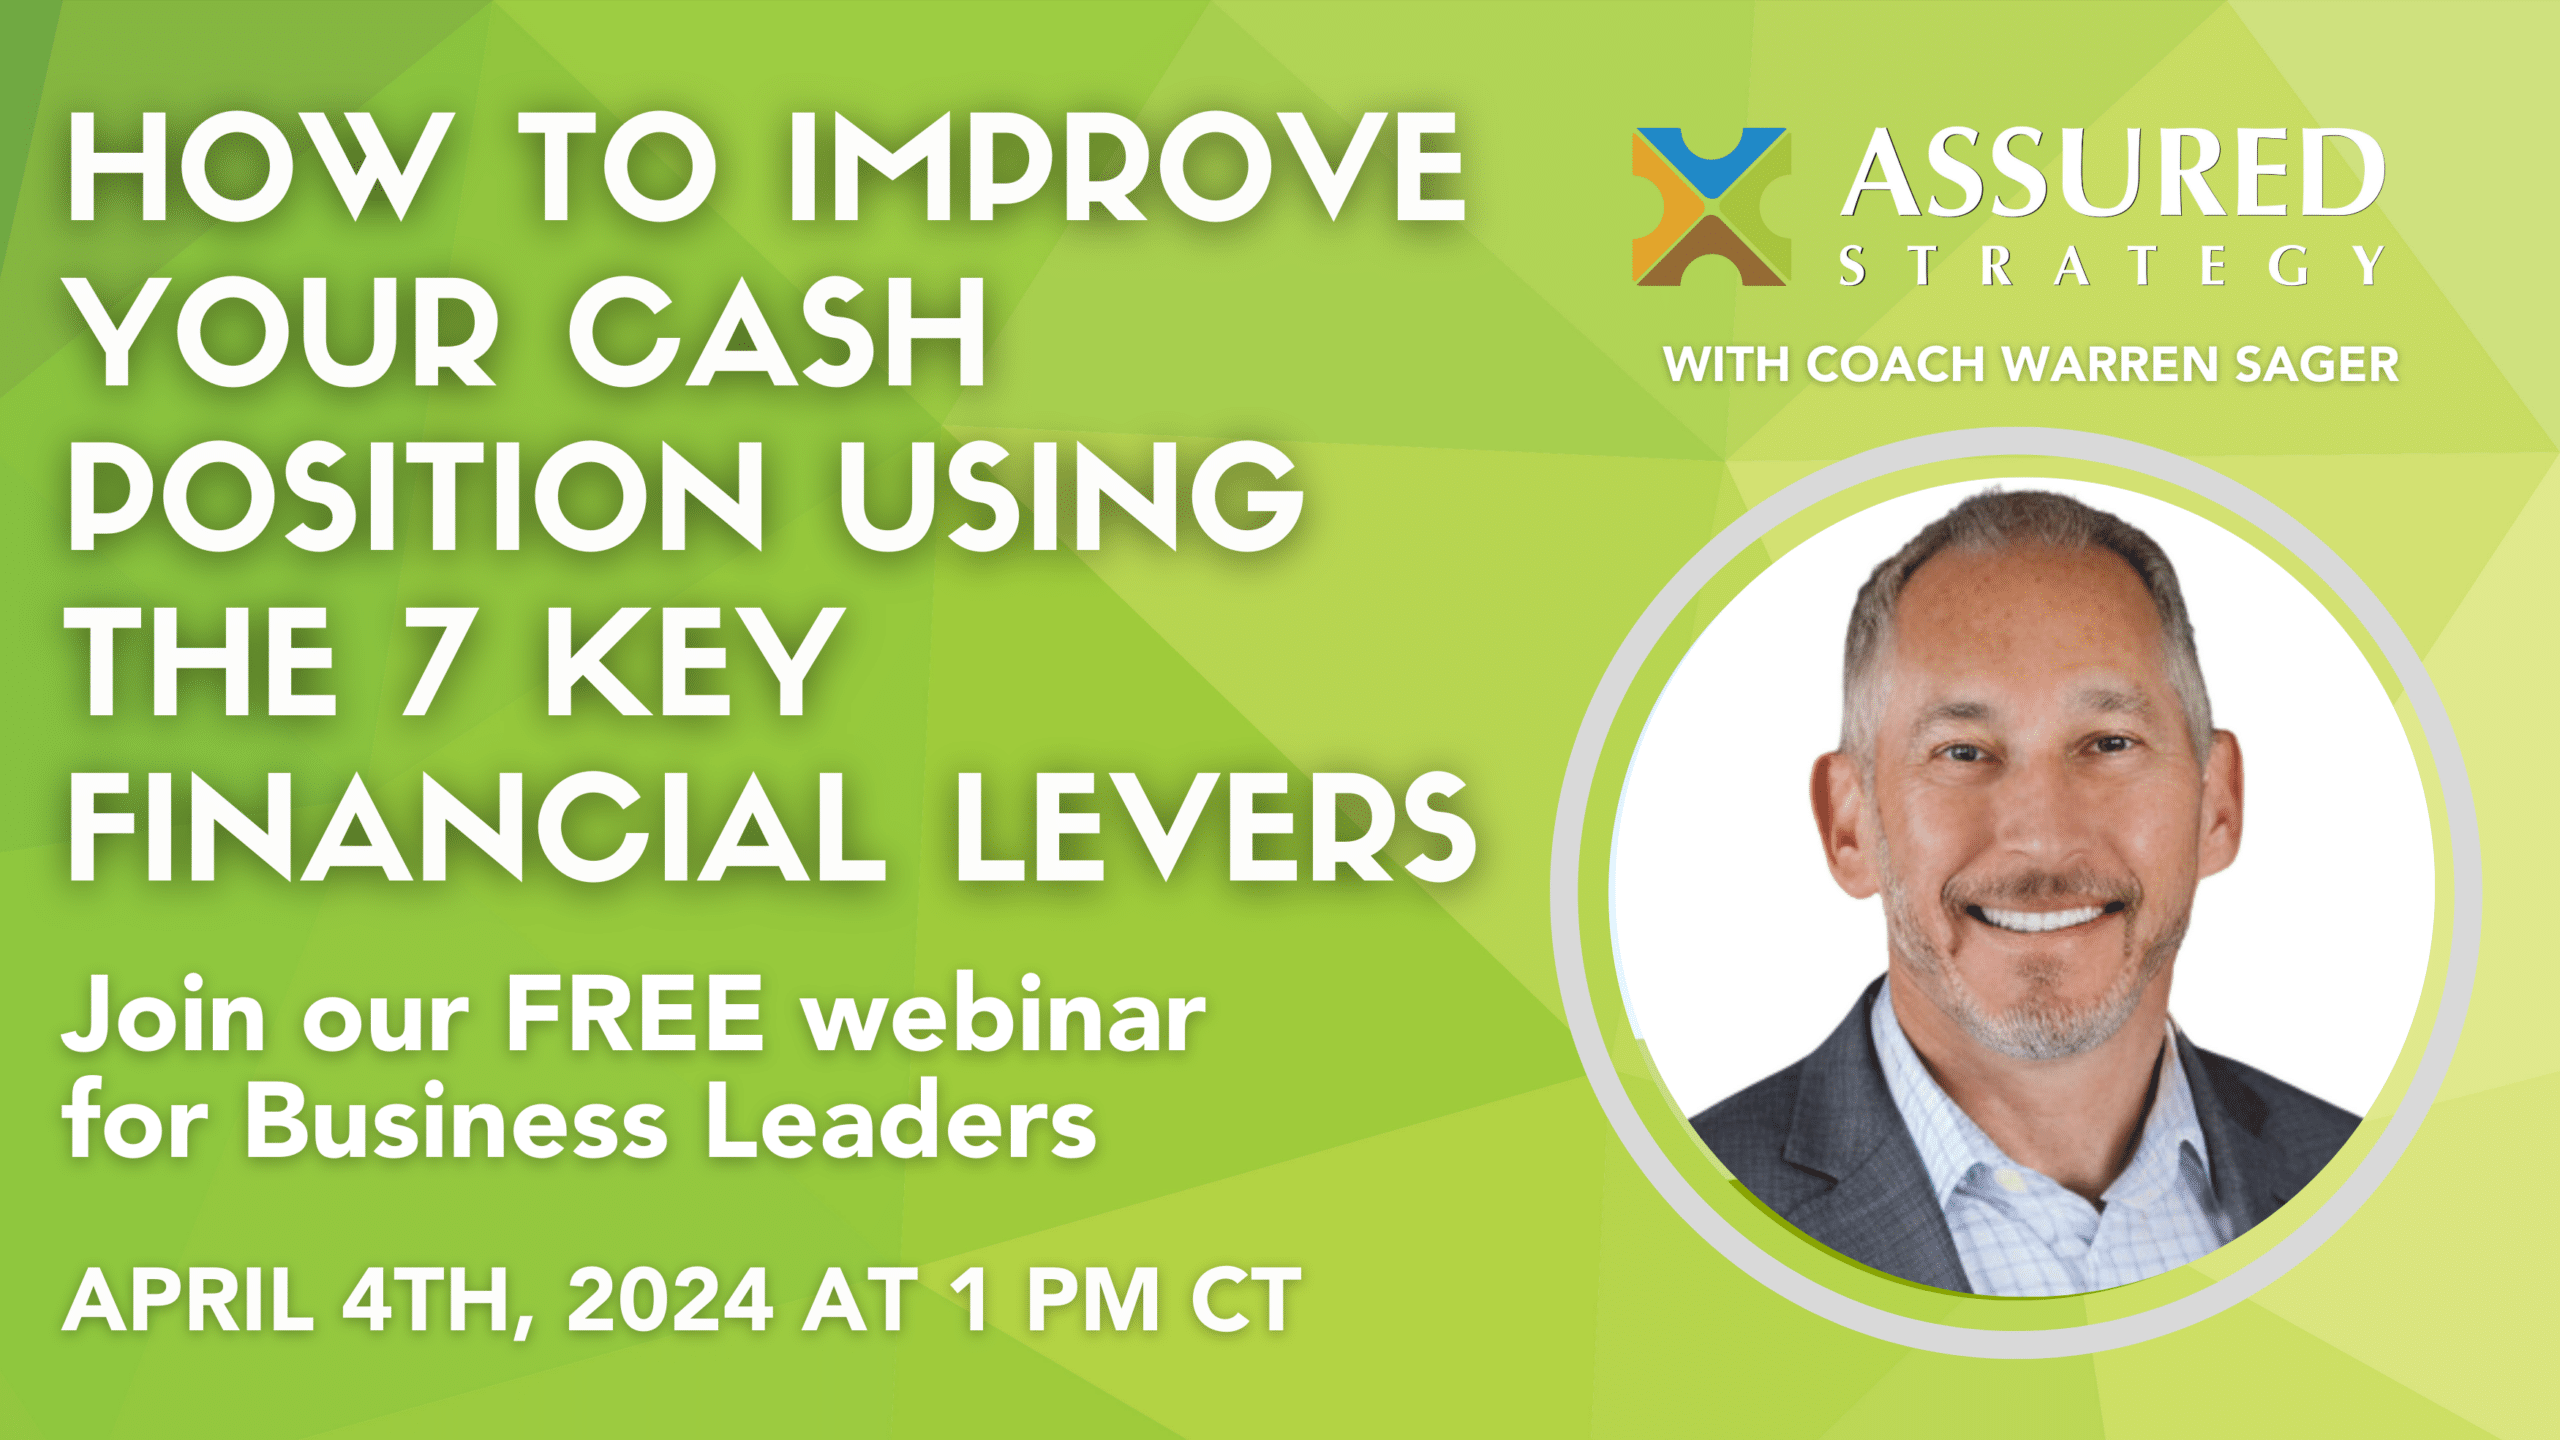 Free Webinar: Improve Your Cash Position Using the 7 Key Financial Levers – April 4th from 1-2pm CT